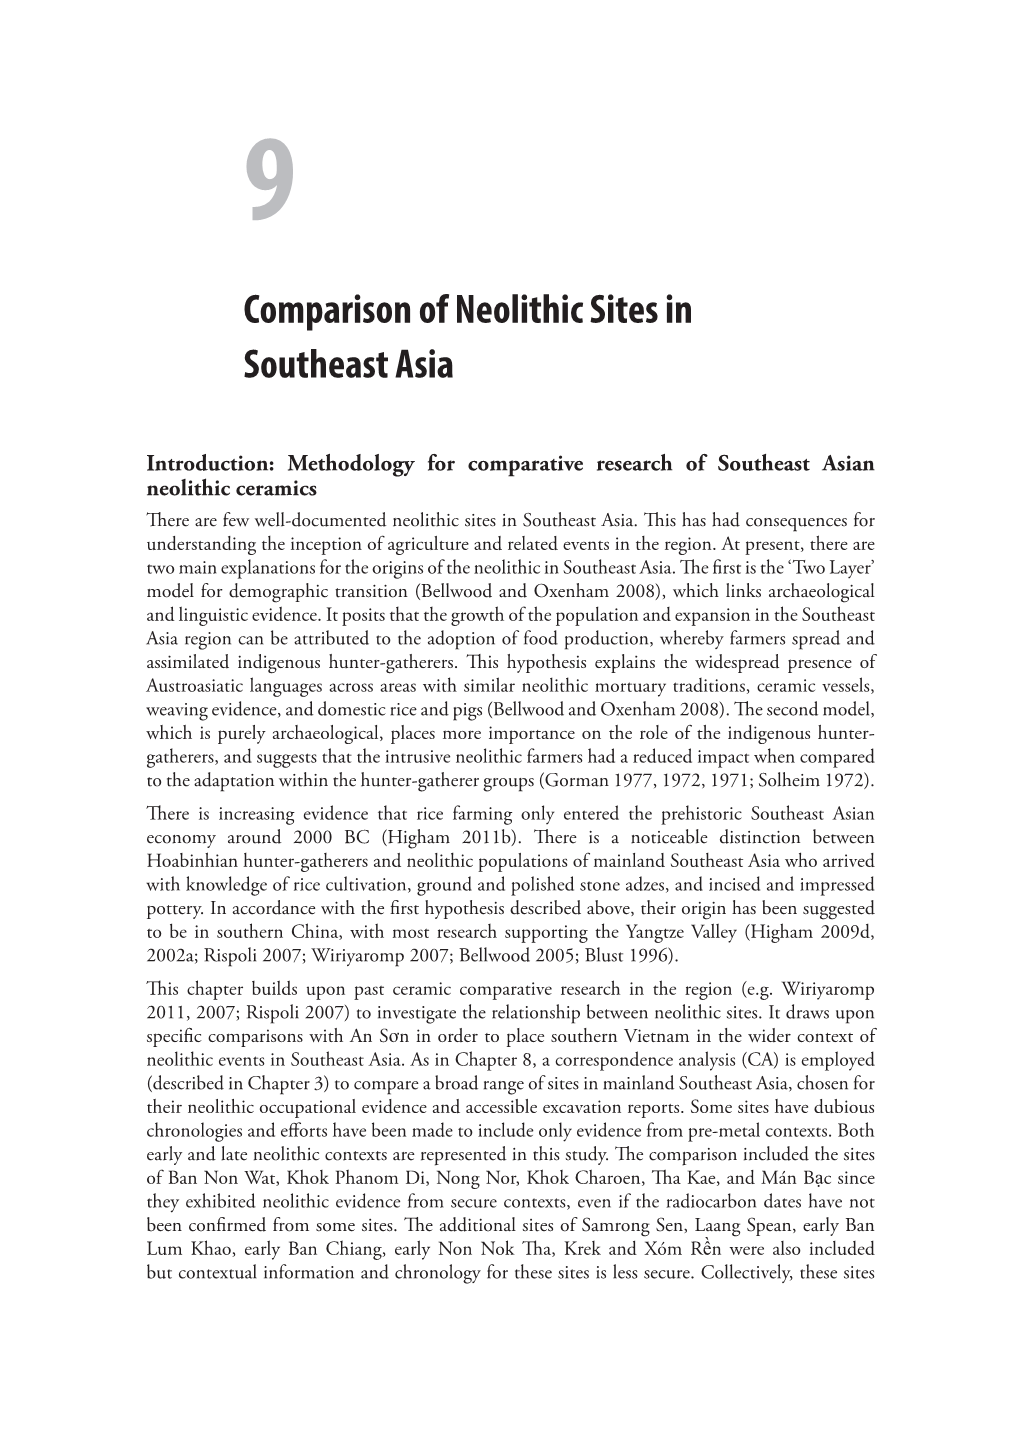 Comparison of Neolithic Sites in Southeast Asia